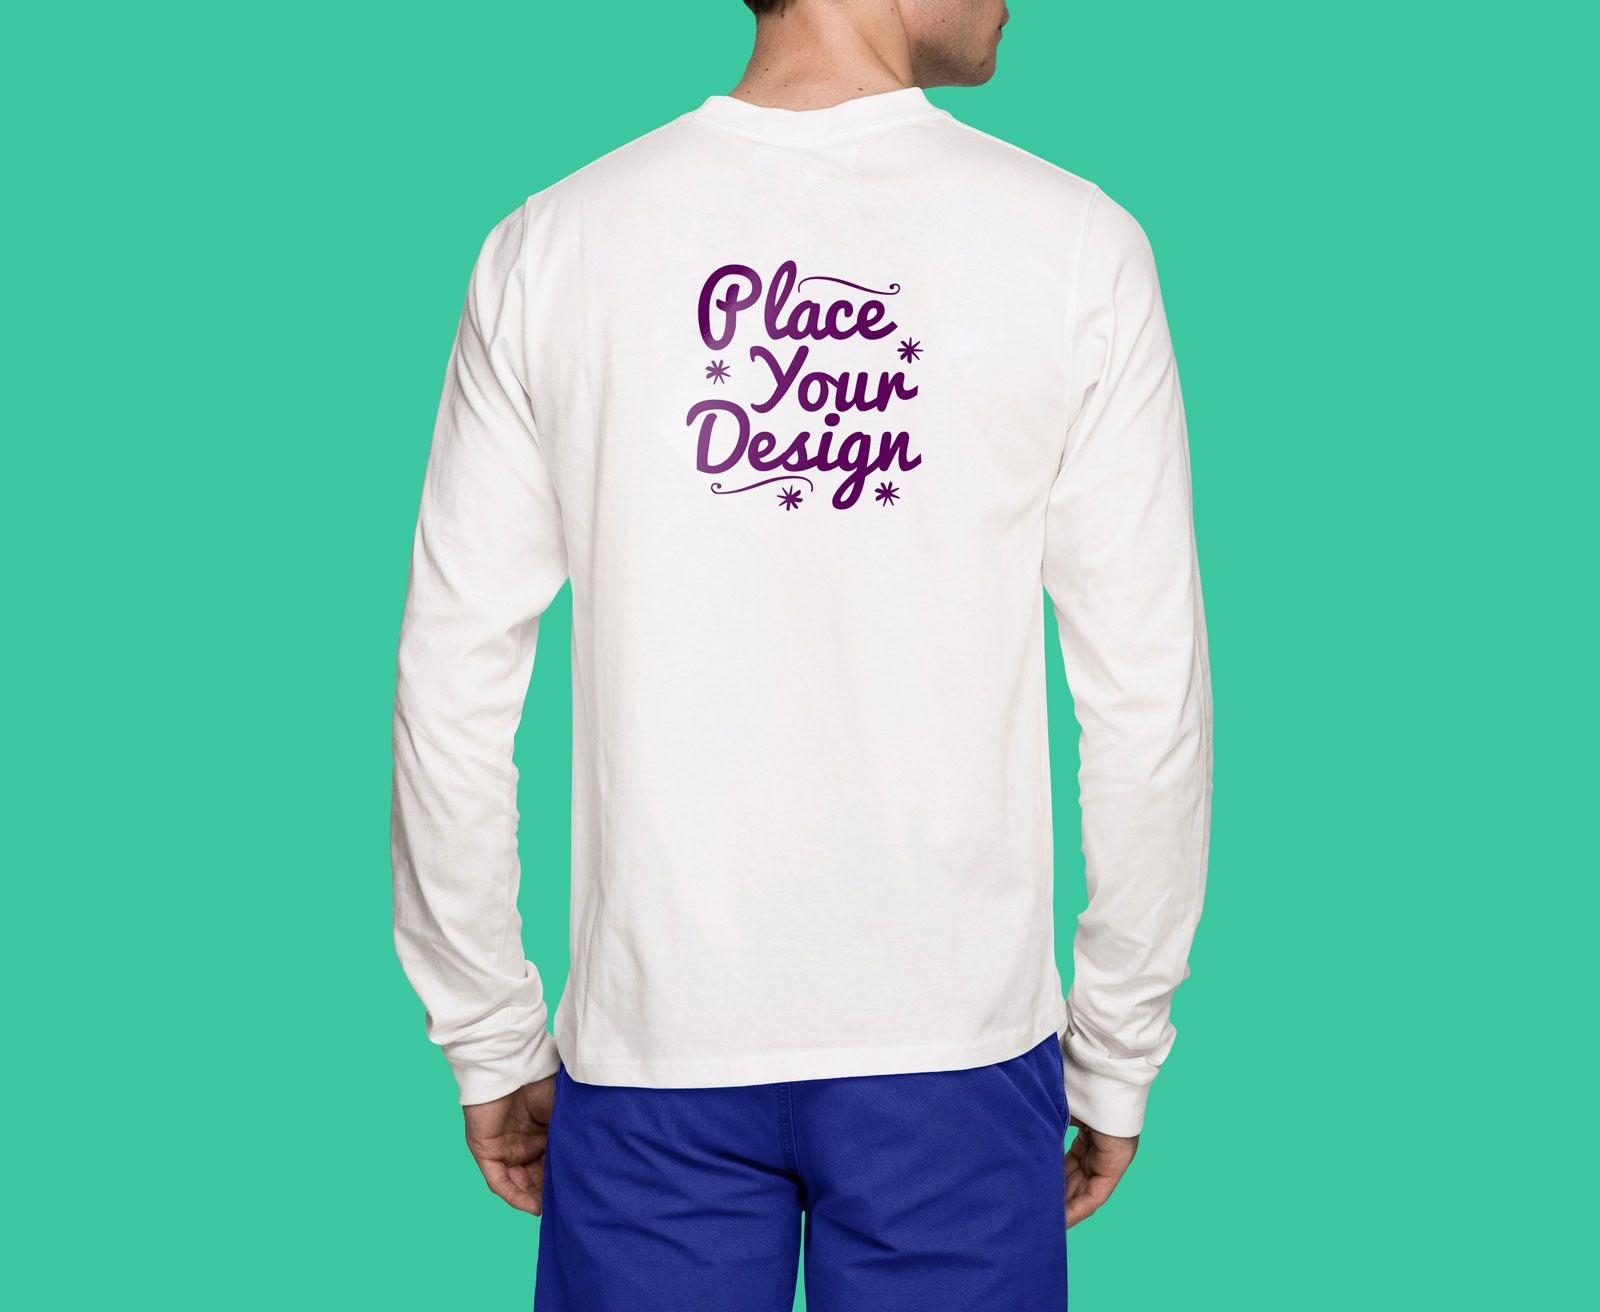 Download 7915+ Long Sleeve T-Shirt Mockup Front And Back Psd Free ...